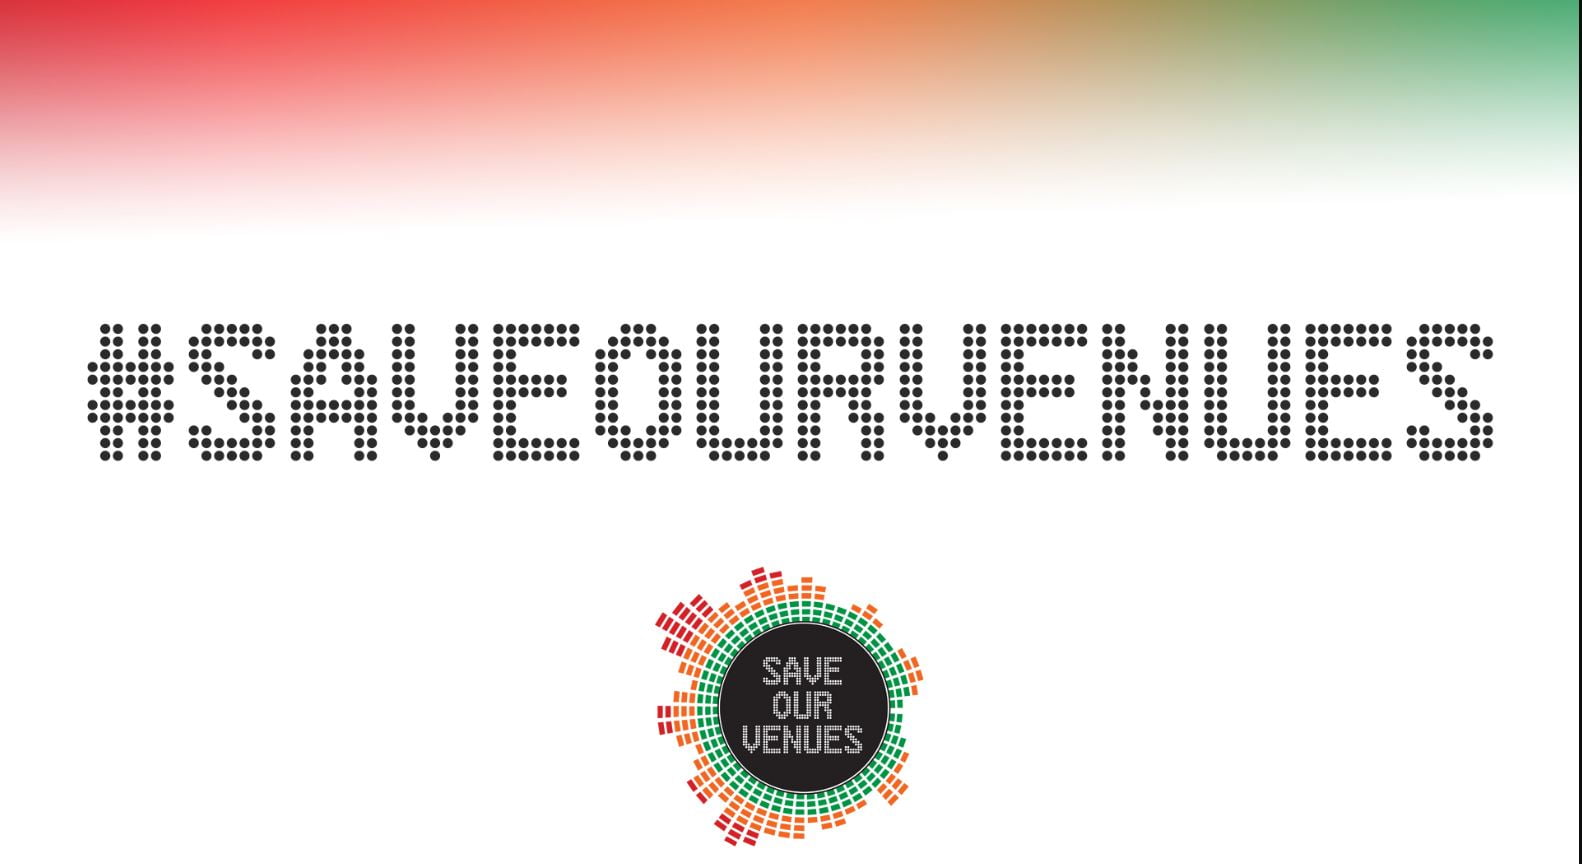 Music Venue Trust launched A Nationwide Campaign To #SaveOurVenues